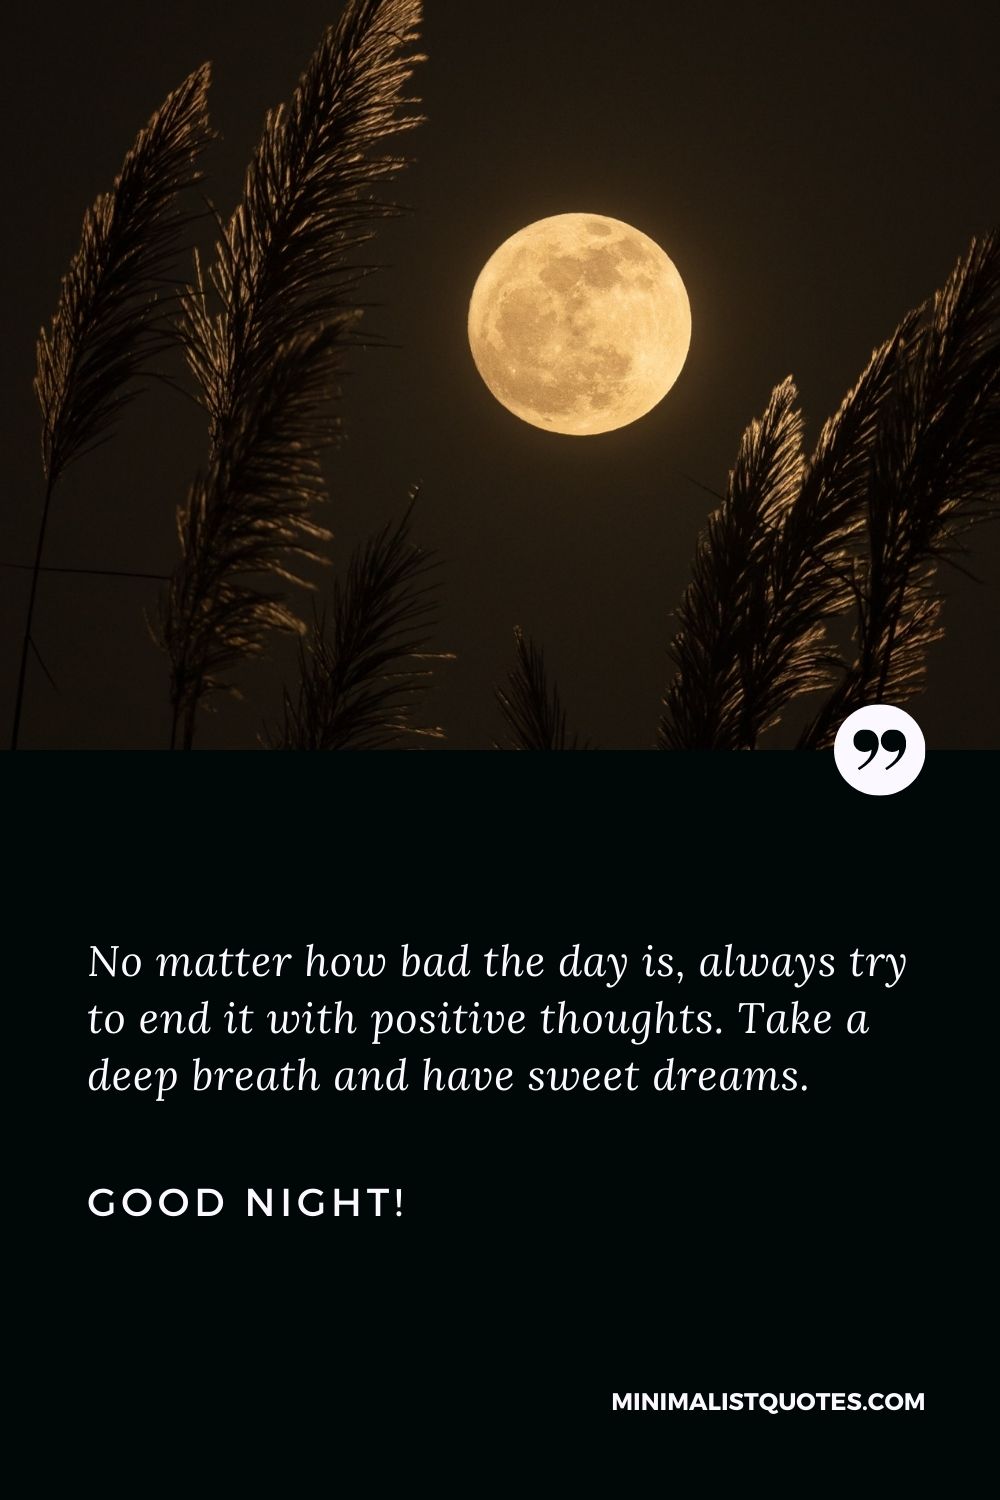 Good night msg: No matter how bad the day is, always try to end it with positive thoughts. Take a deep breath and have sweet dreams. Good Night!